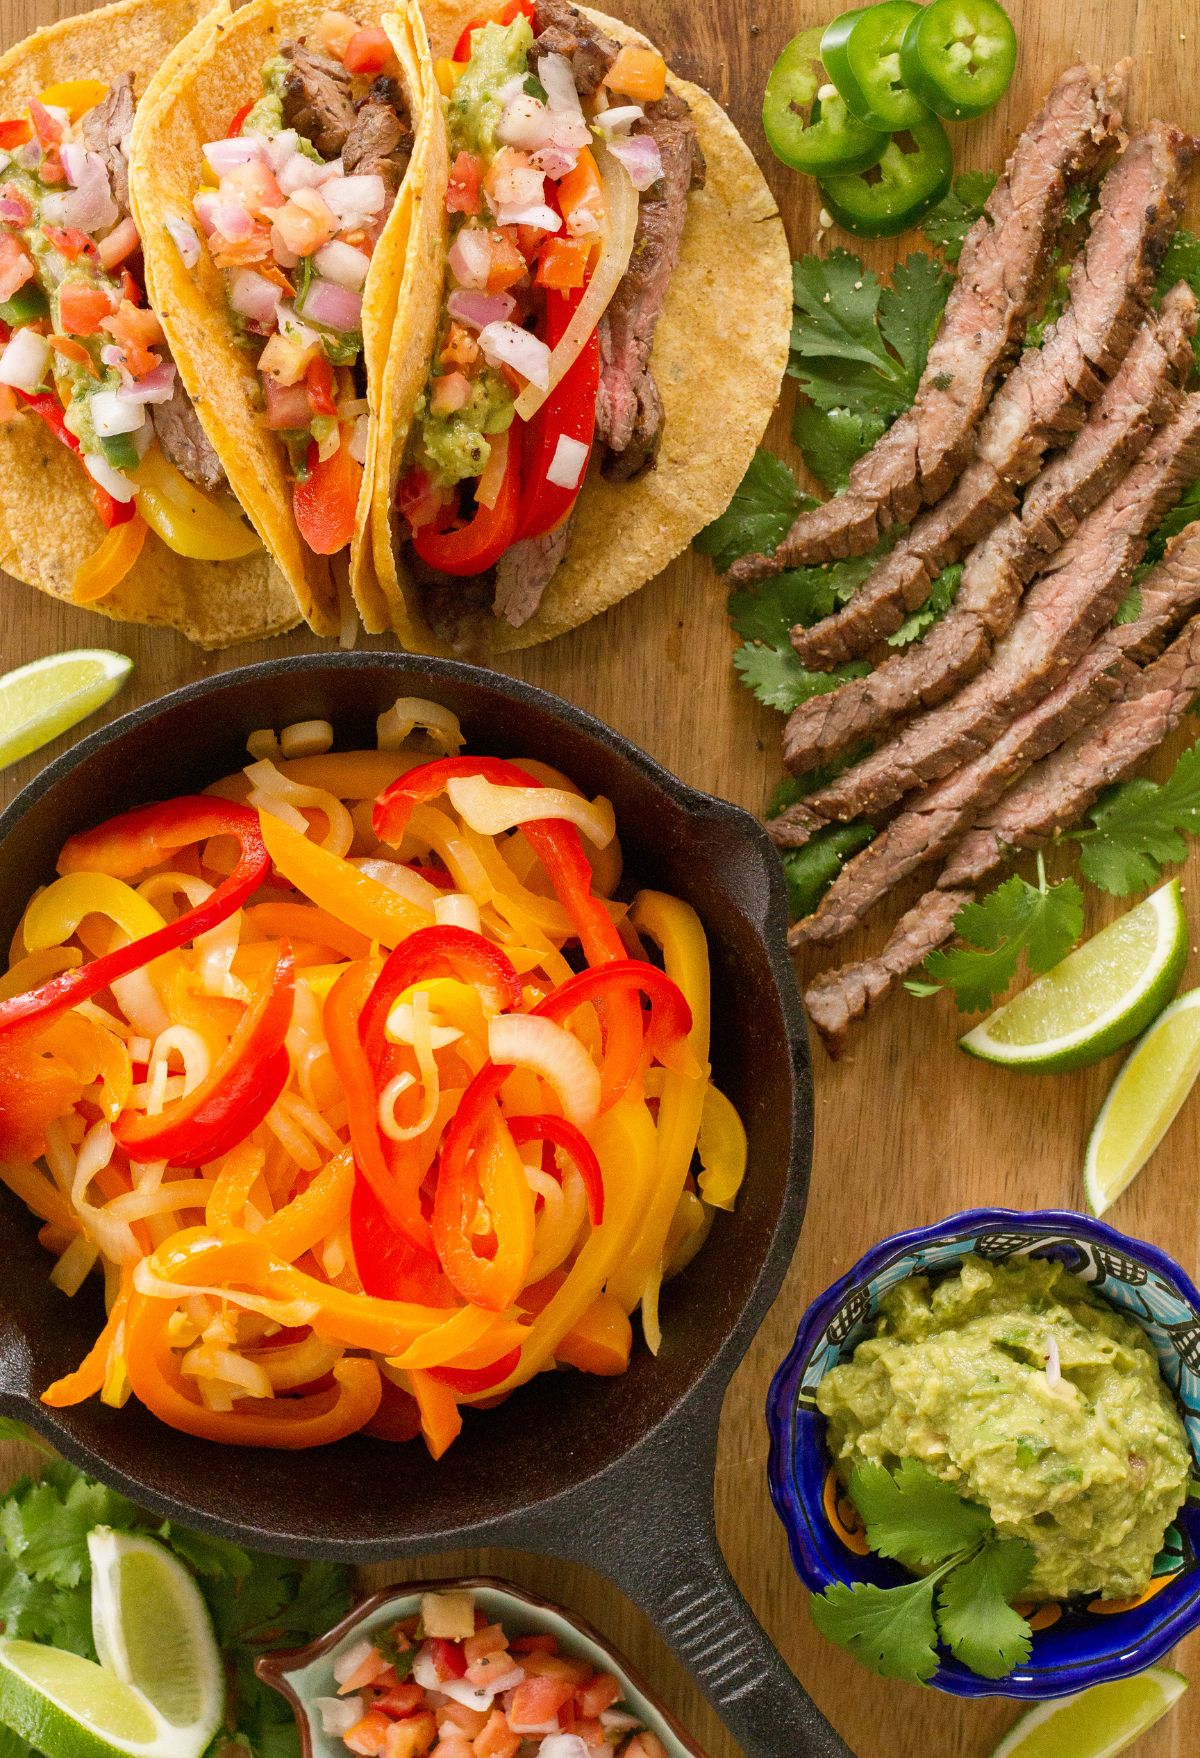 A variety of mexican dishes including tacos, sliced steak, a skillet of sautéed bell peppers, guacamole, and fresh limes on a wooden table.